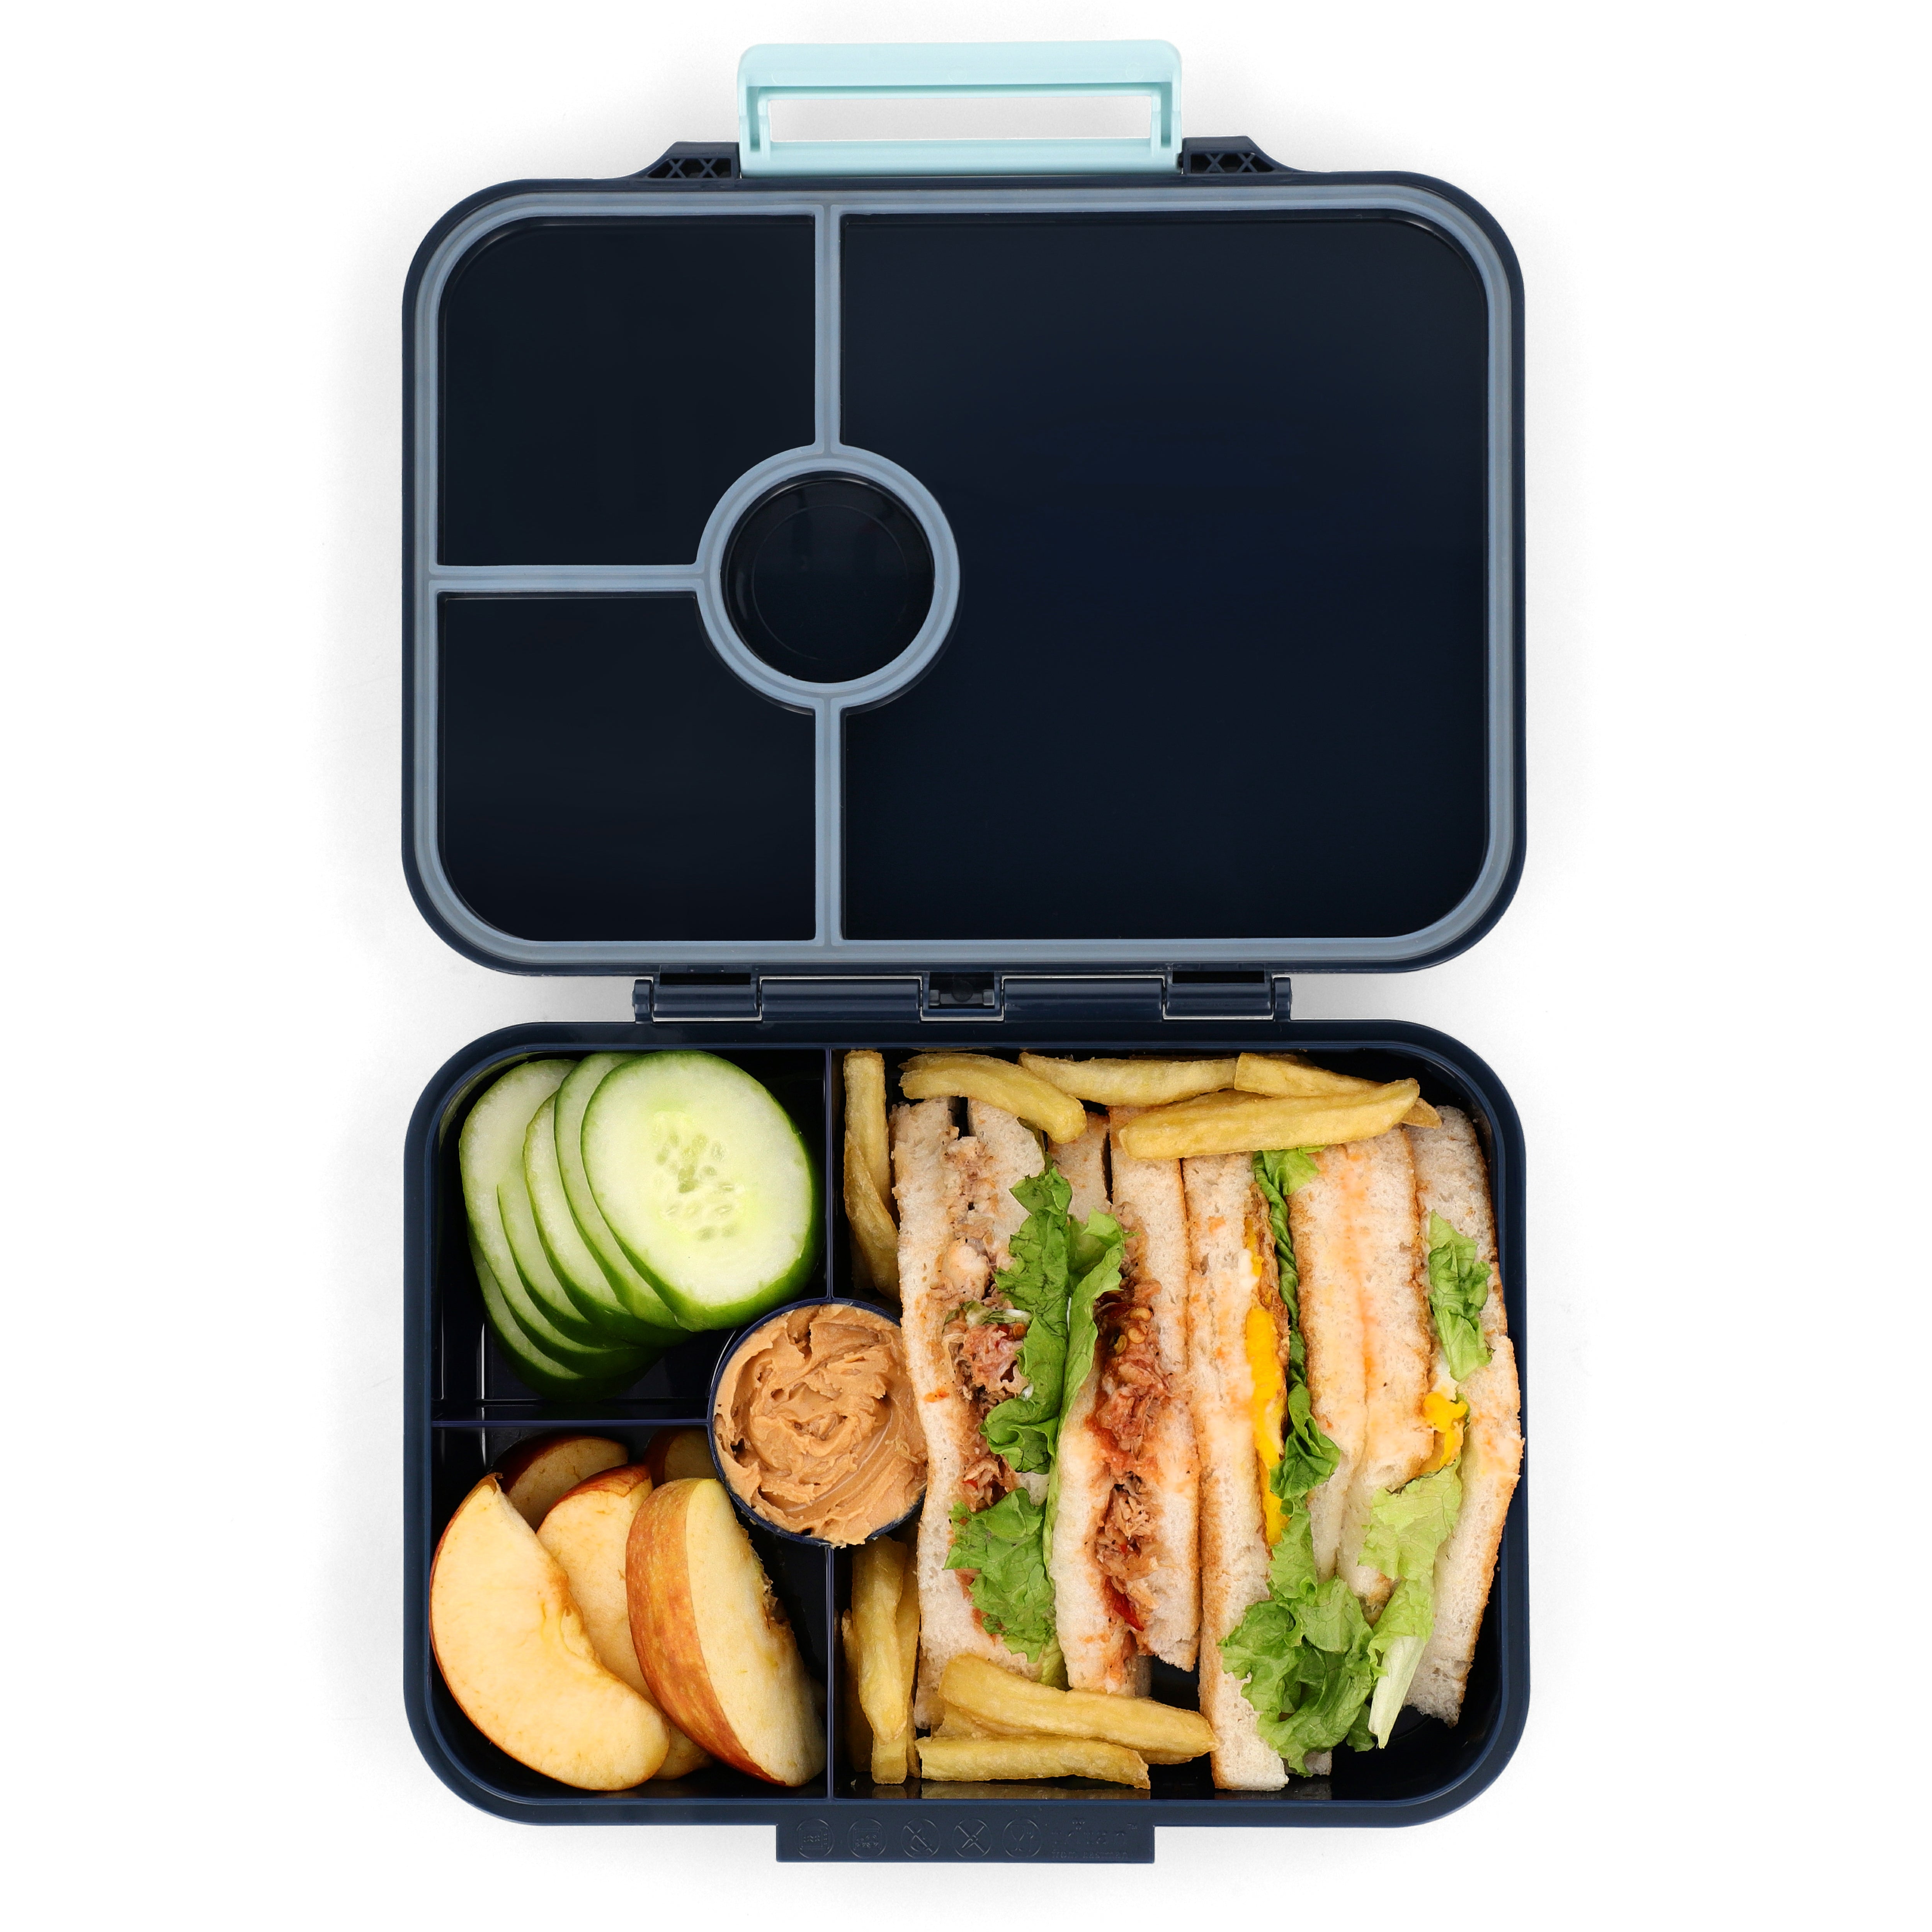 LeakProof Tritan Bento Box & Spill-Proof Insulated Water Bottle, Dishwasher Safe, BPA Free (Deep Blue - Vehicles/Car)